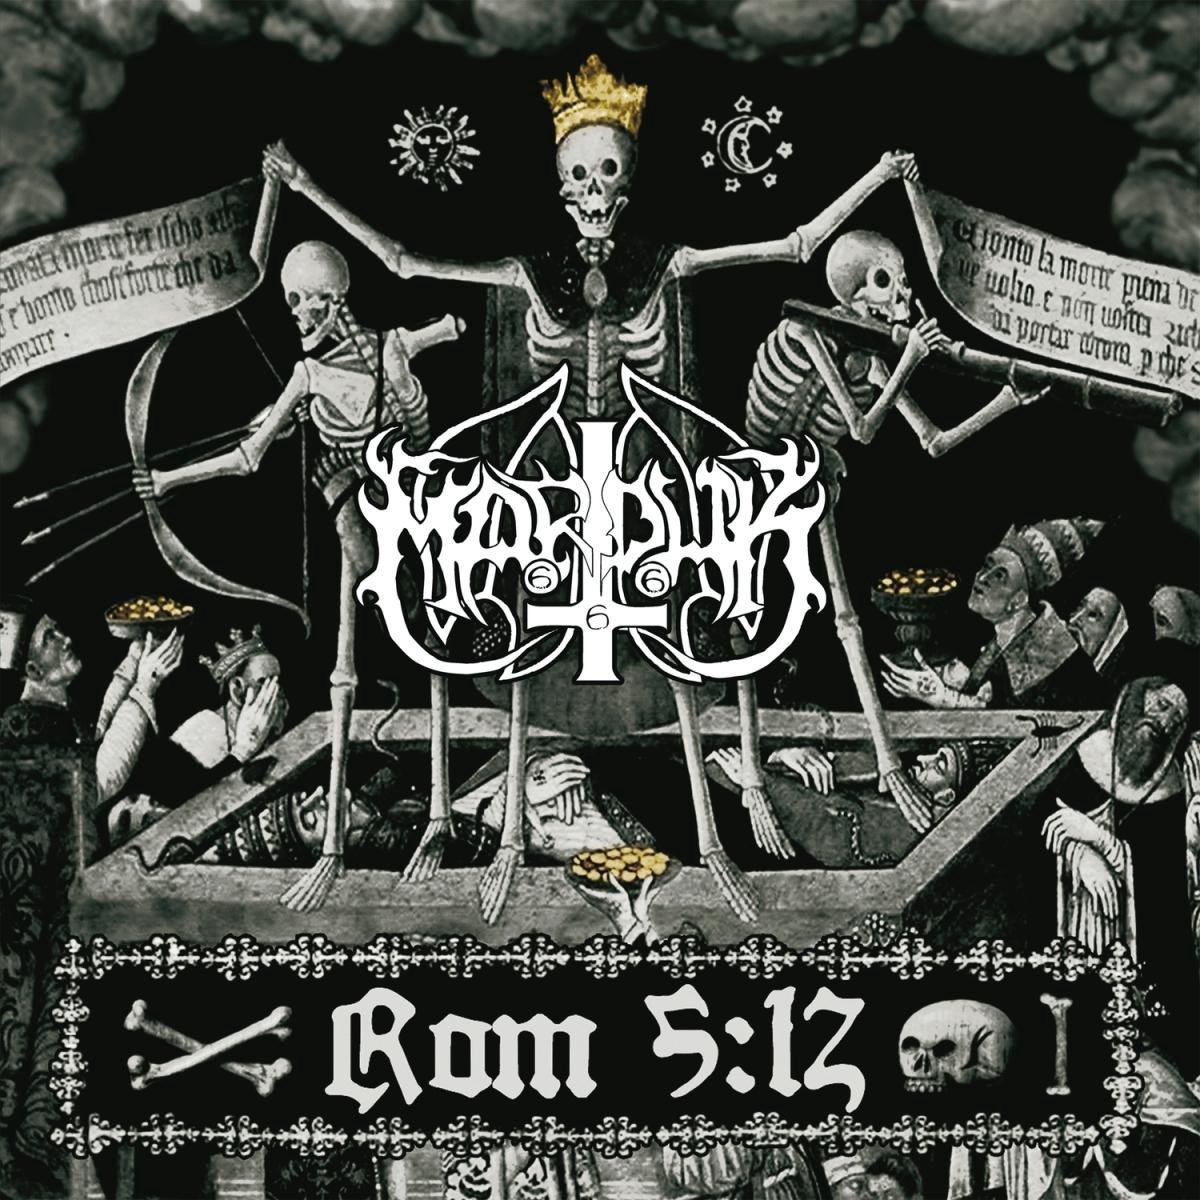 Rom 5:12 (re-issue 2020) - Marduk